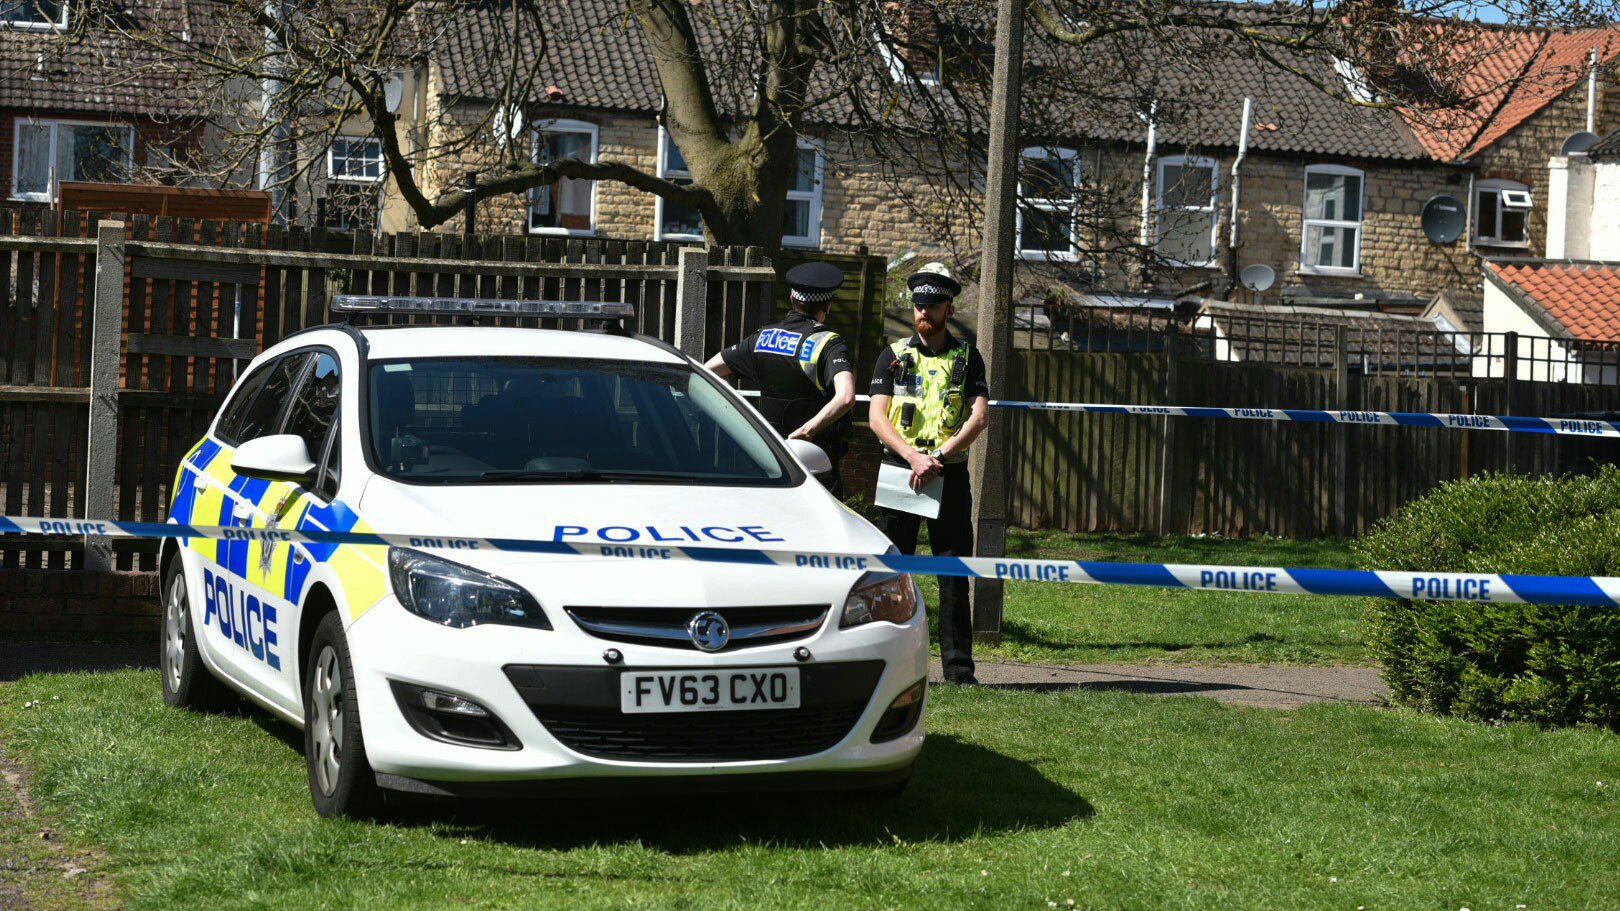 Police are guarding the scene of the Walnut Place fatal stabbing in Lincoln. Photo: Steve Smailes for The Lincolnite